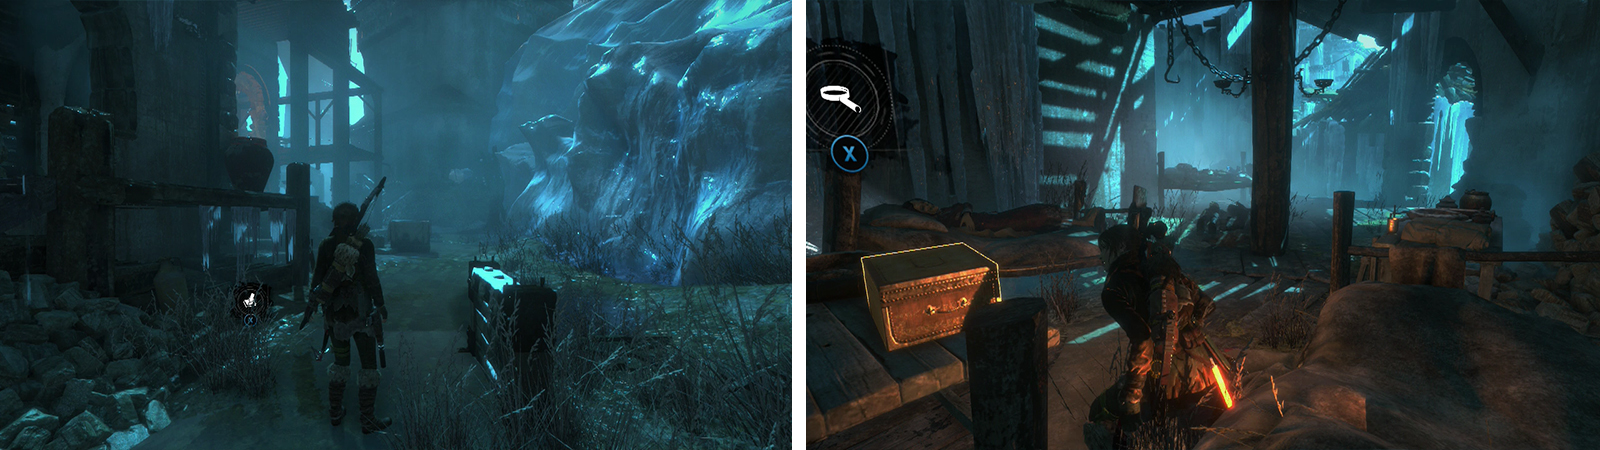 After deciphering the Monolith, Coin Cache 01 is nearby (left). Relic 01 (right) can be found in a building at the base of the stairs by where we ziplined into the area.